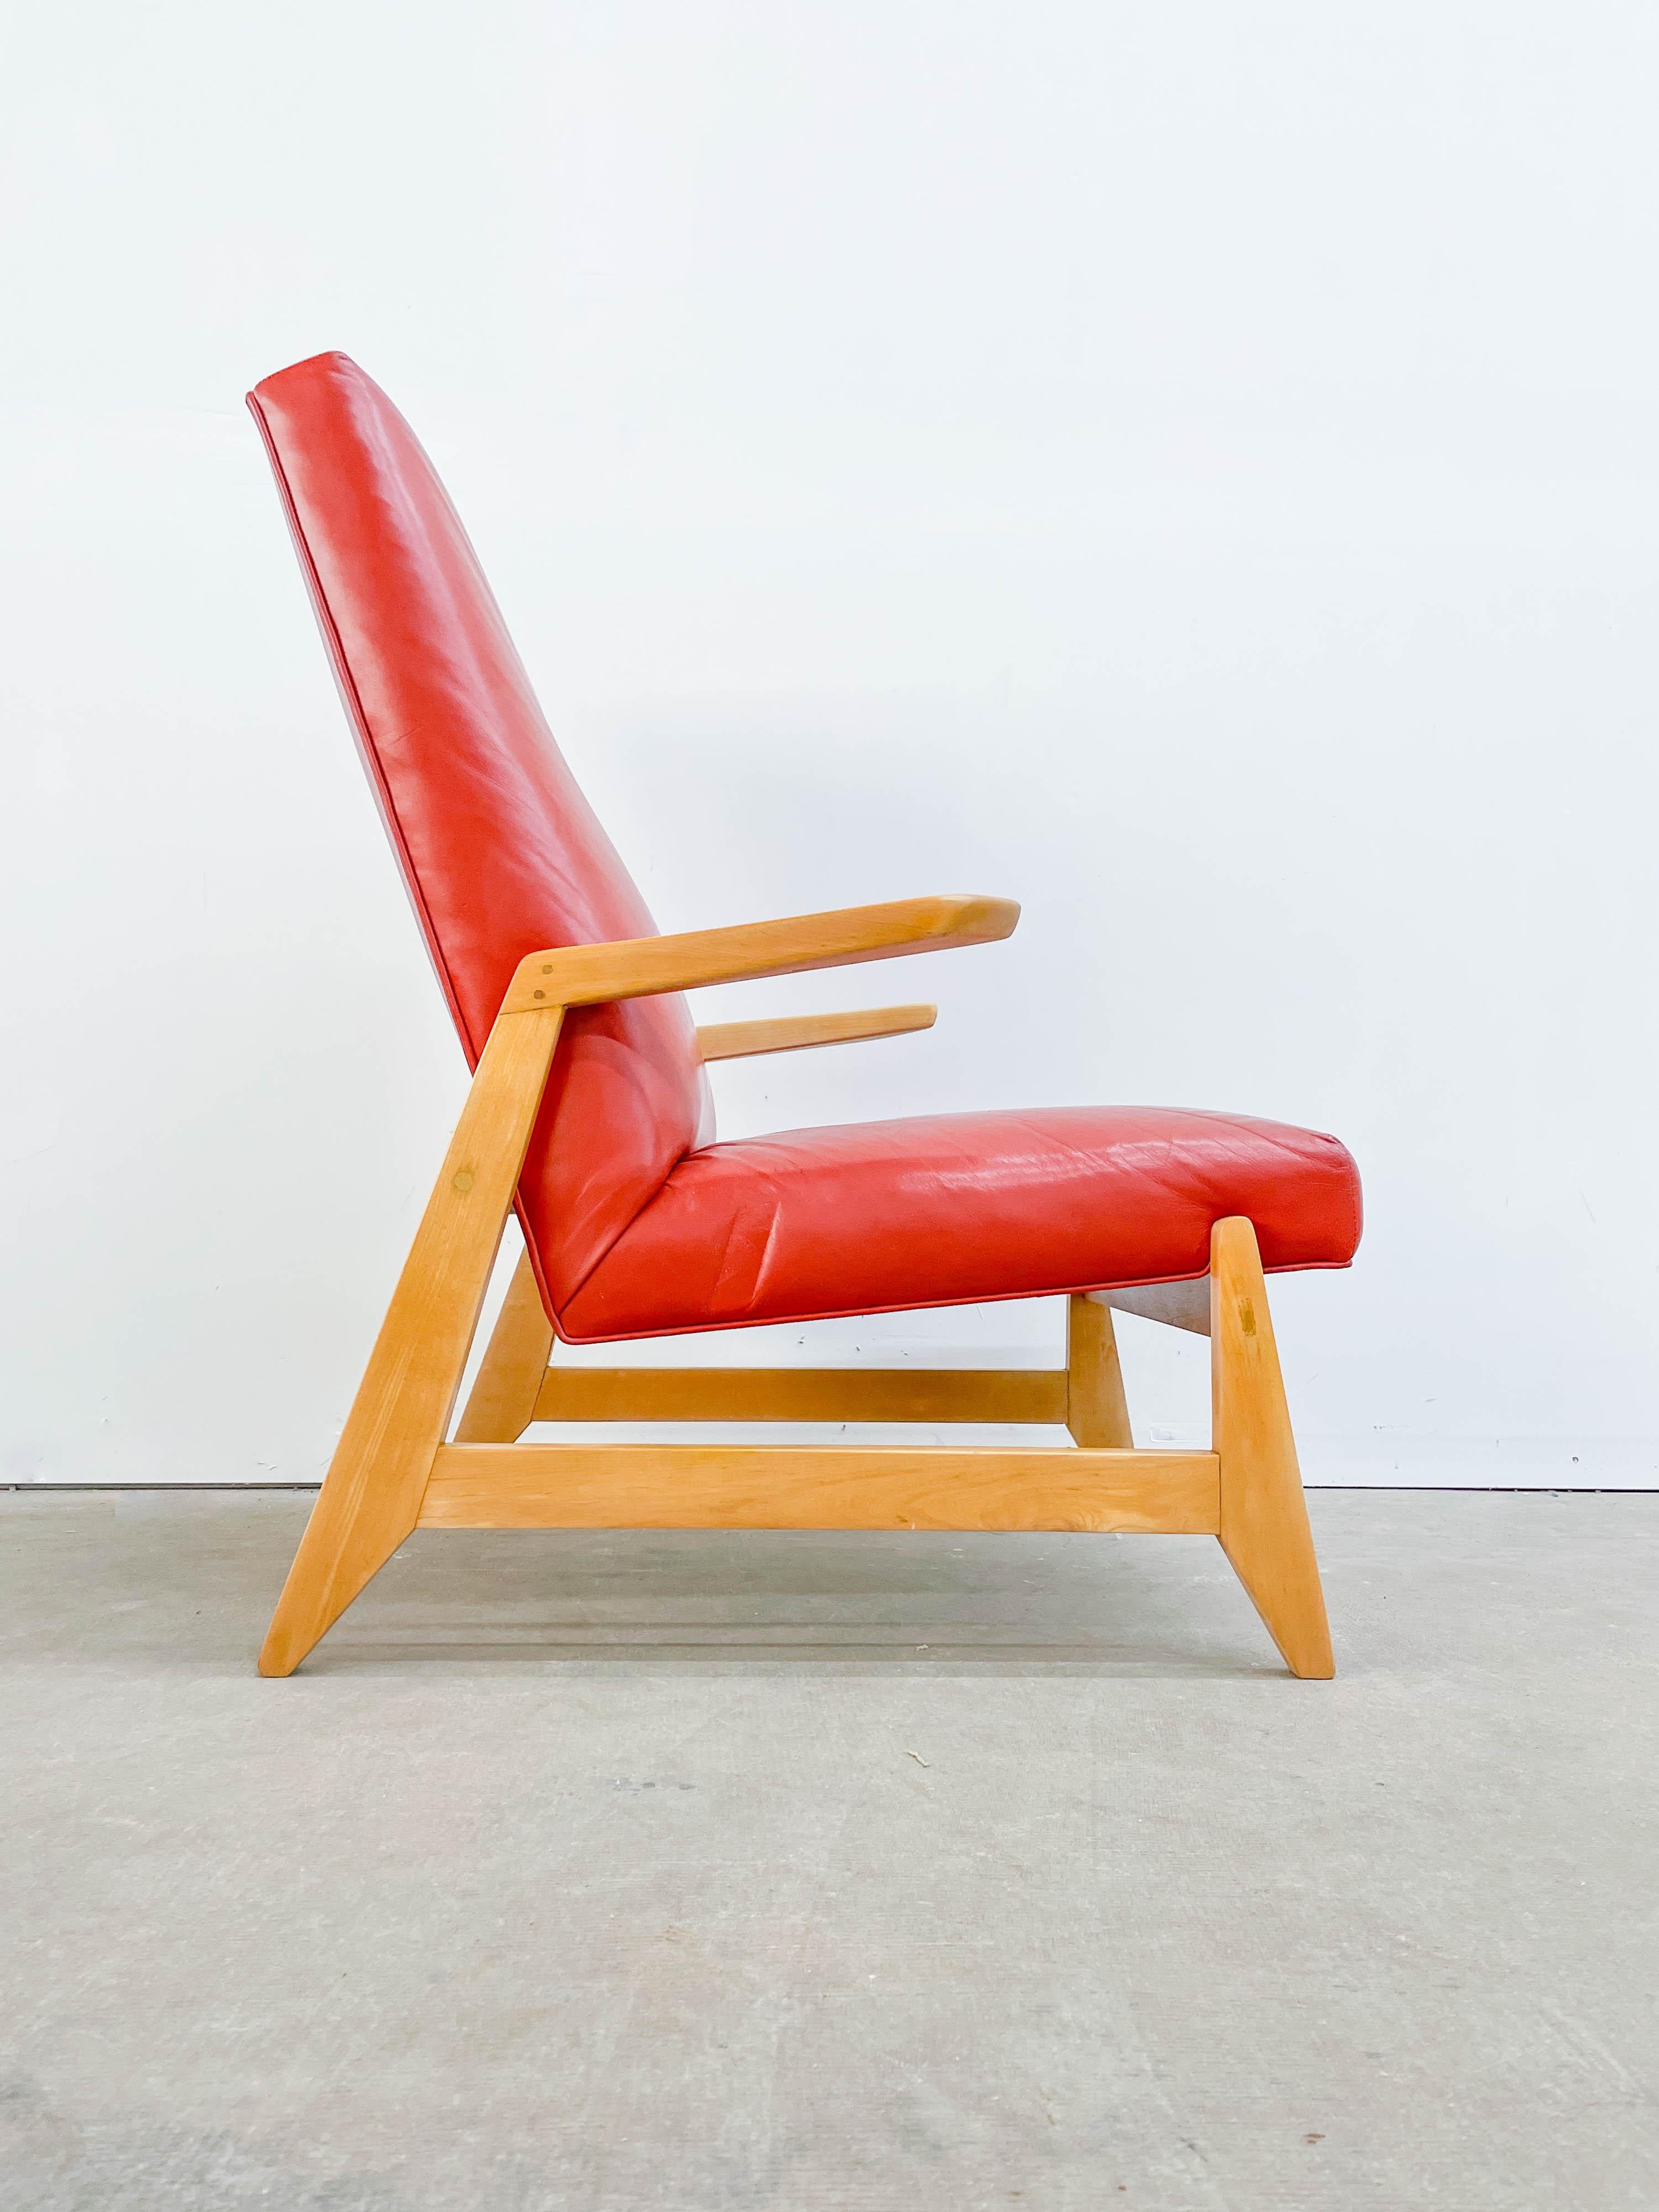 Rare highback armchair designed by Ralph Rapson for Knoll Asoociates in the mid 1940s. Debuting in Arts and Architecture magazine in 1945, this armchair is one of the five designs Rapson came up with after being invited by Cranbrook classmate